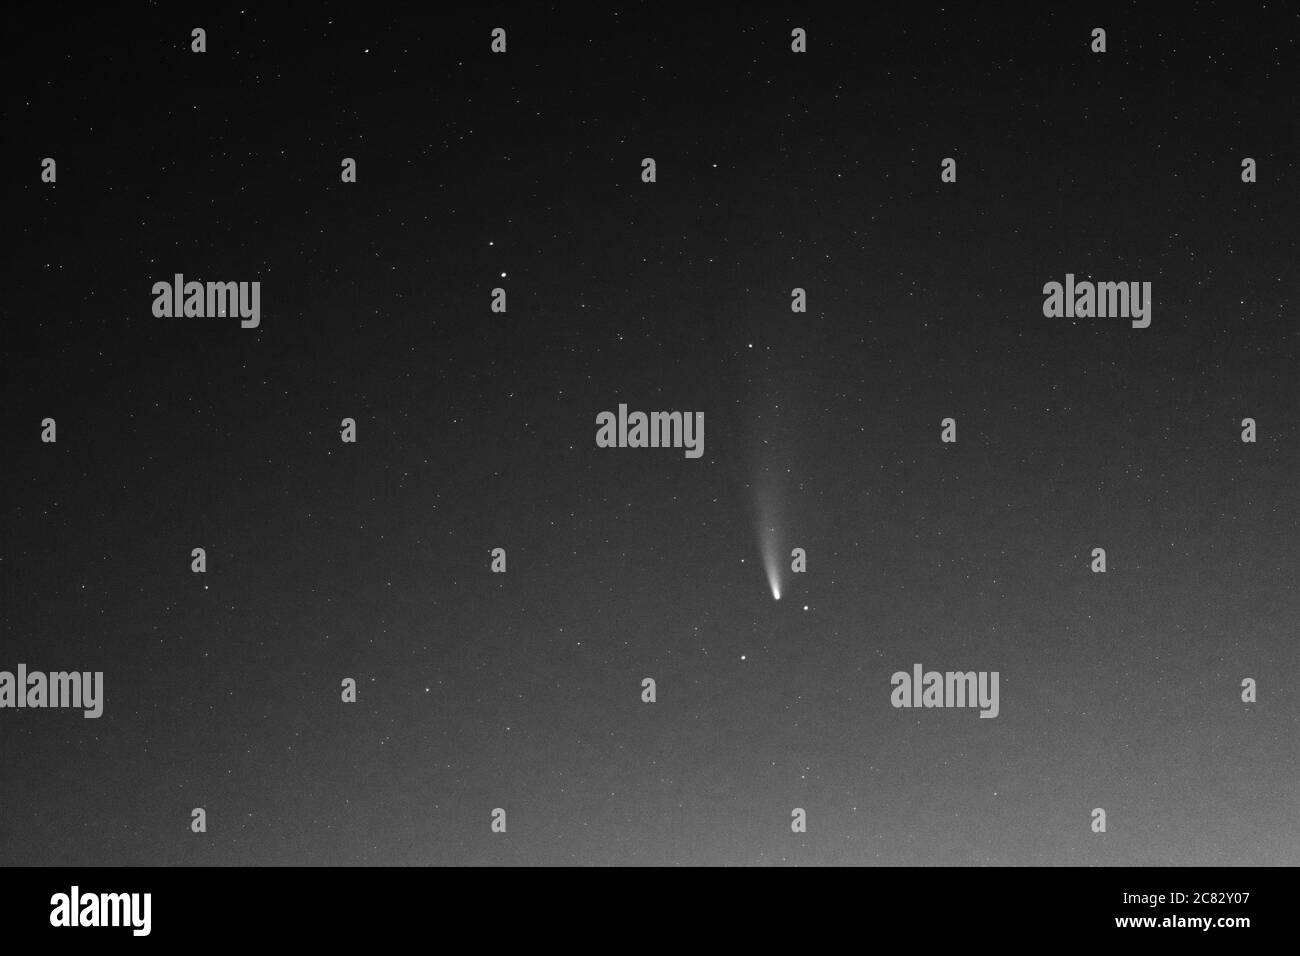 Black and White Image of Comet Neowise in the Night Sky, 18th July 2020, County Durham, England, UK. Stock Photo